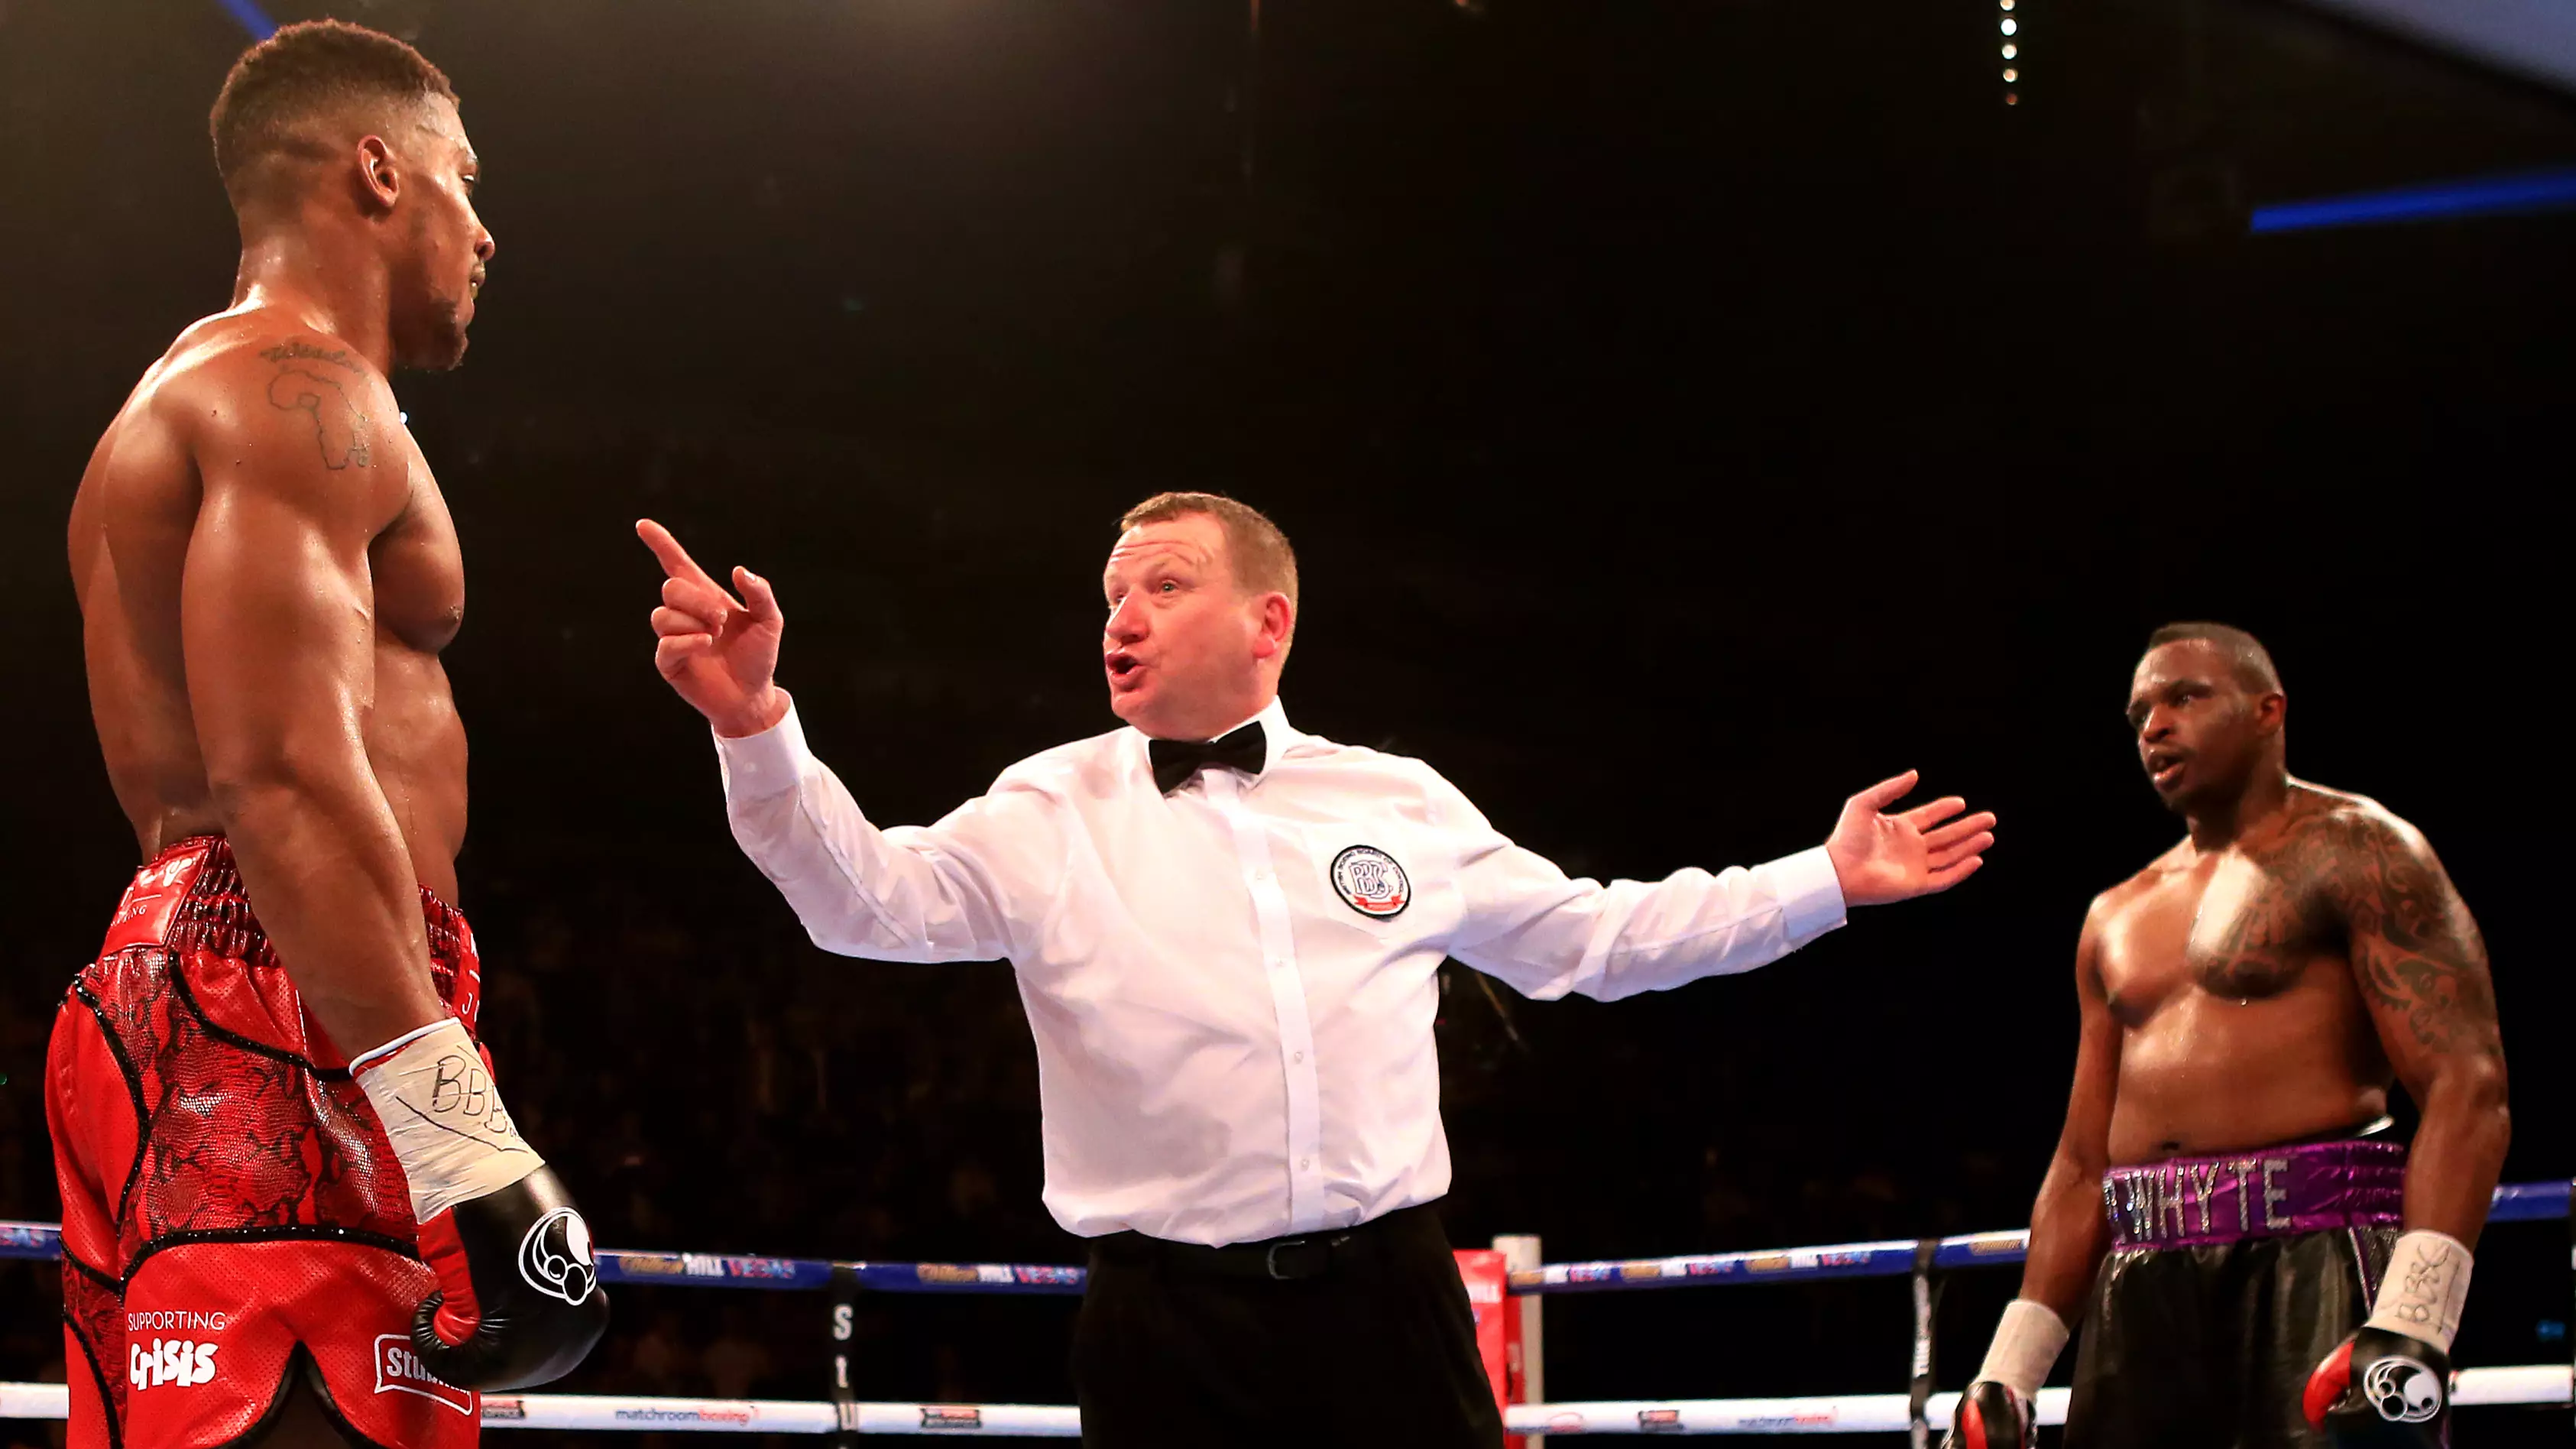 Dillian Whyte Responds To Anthony Joshua After He Threatened To 'Give Him A Punch'